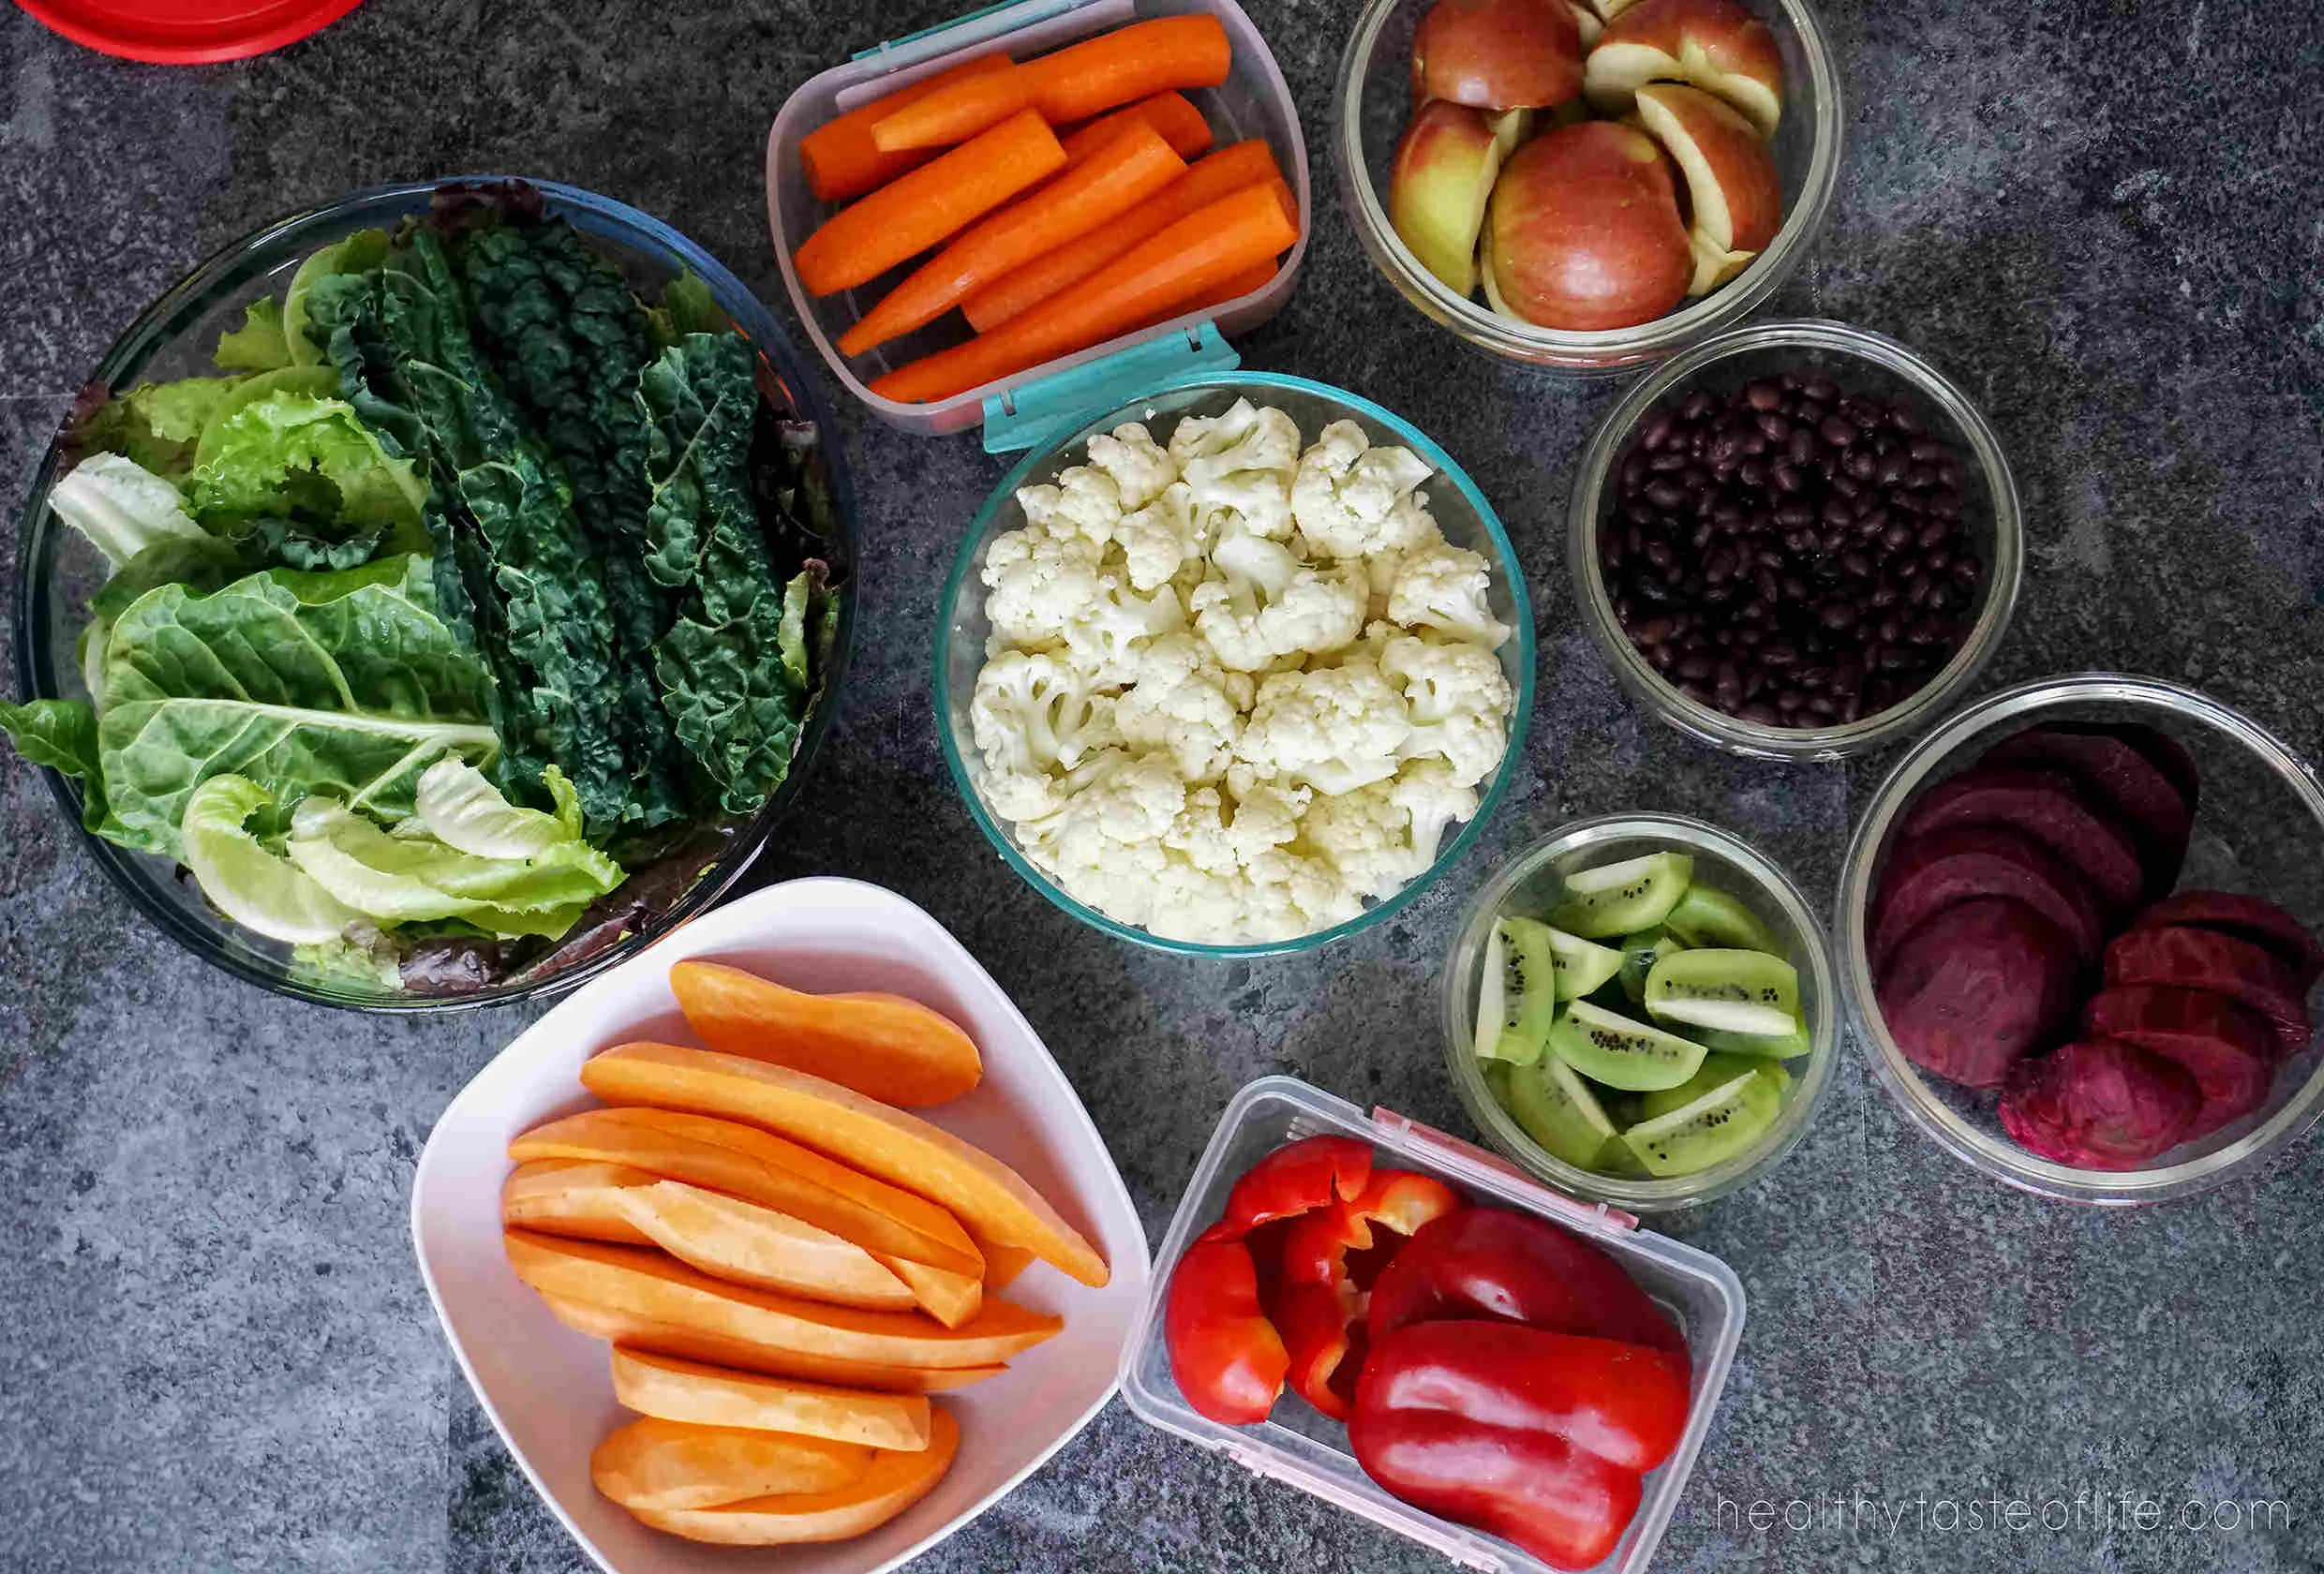 Learn a few meal prep tips for clean eating: how to store and organize fresh produce and cooked food in order to keep it fresh longer. These are great meal prep tips will teach you how to store cut veggies and fruits to last longer.